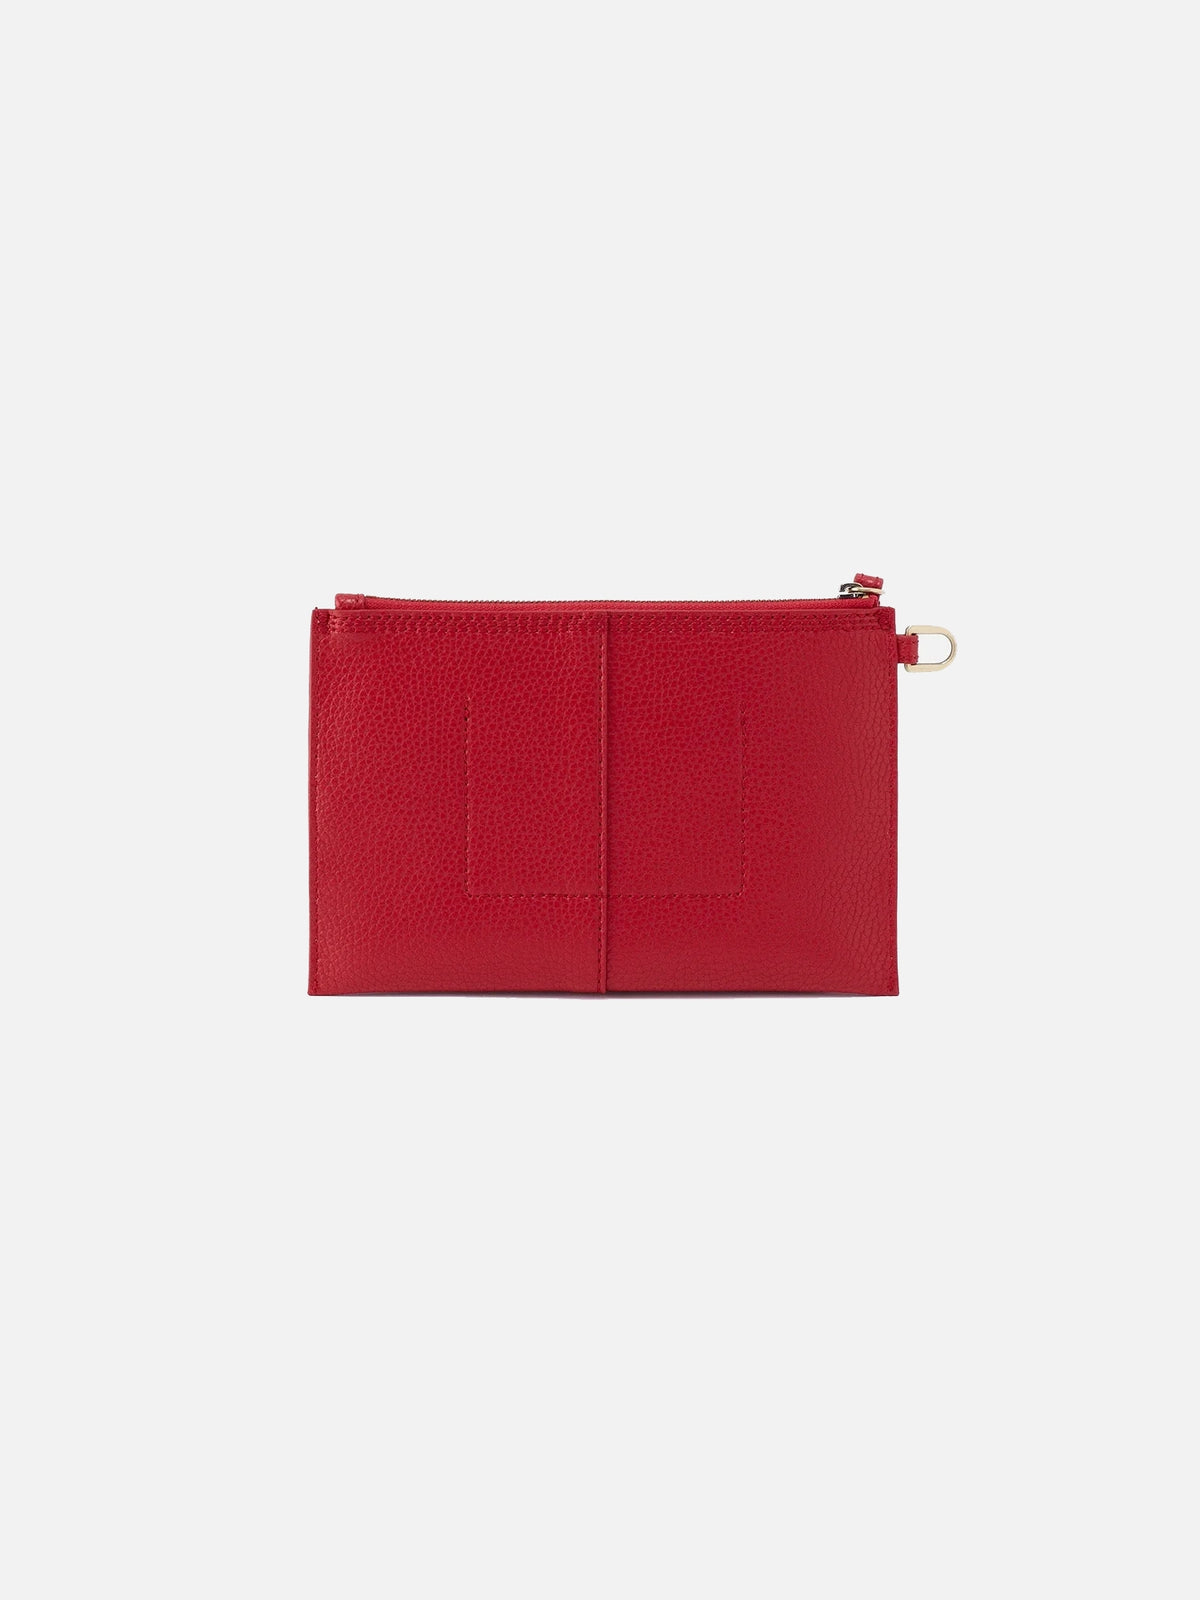 hobo vida small pouch in tango red micro pebbled leather